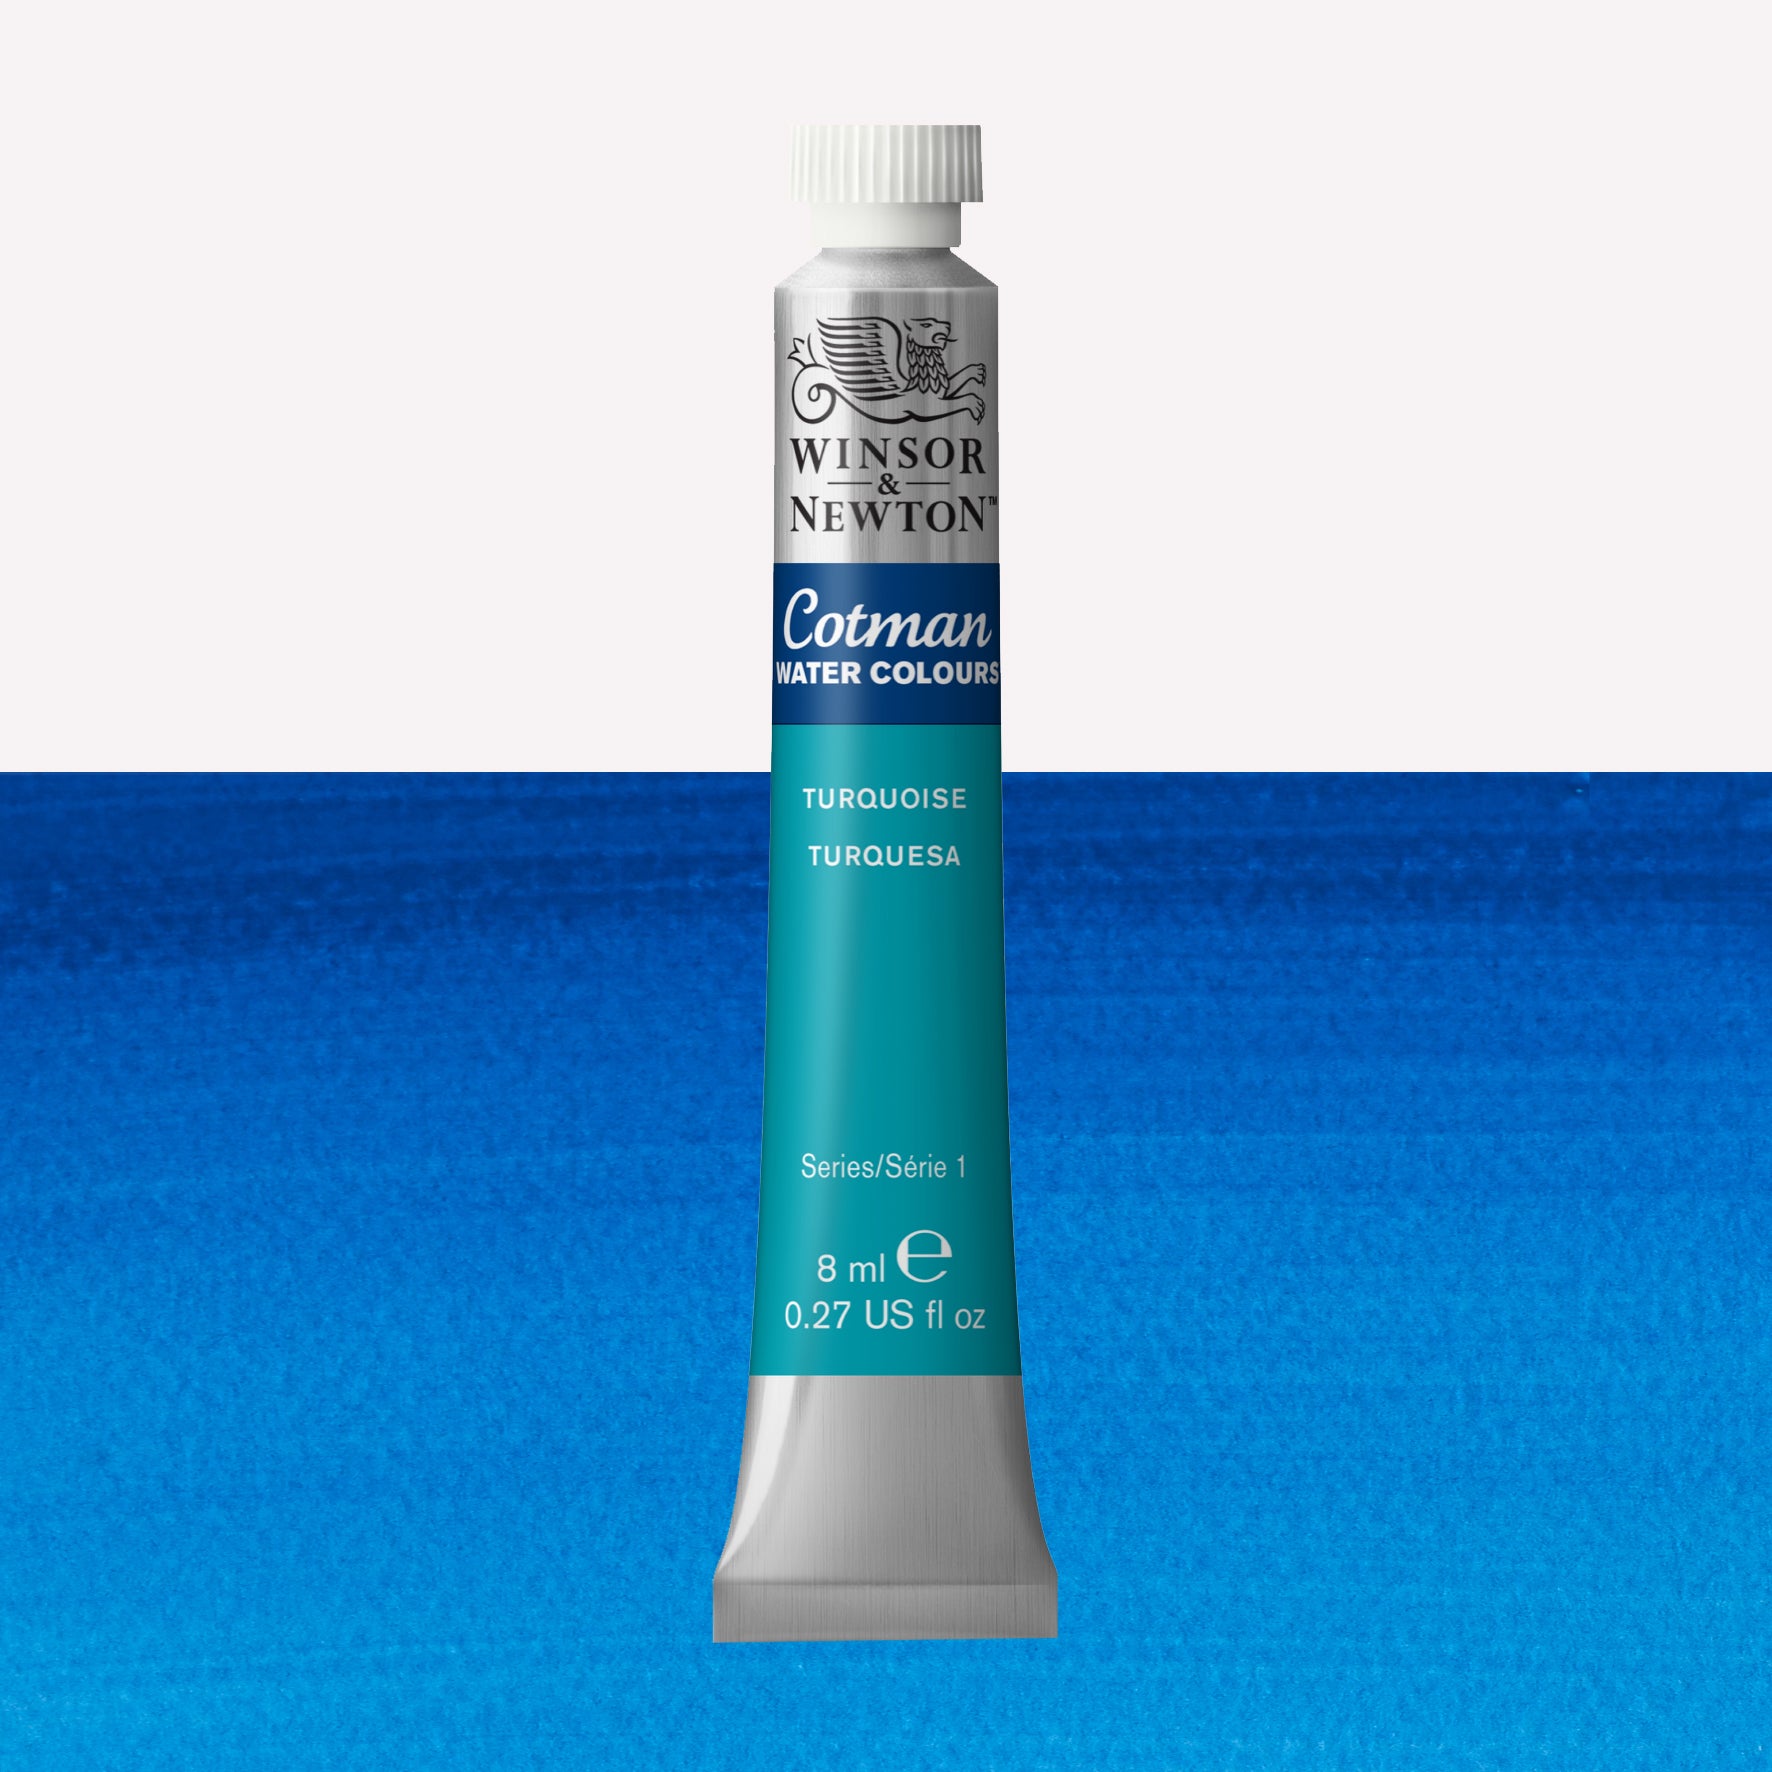 Winsor & Newton Cotman watercolour paint packaged in 8ml silver tubes with a white lid in the shade Turquoise over a highly pigmented colour swatch.